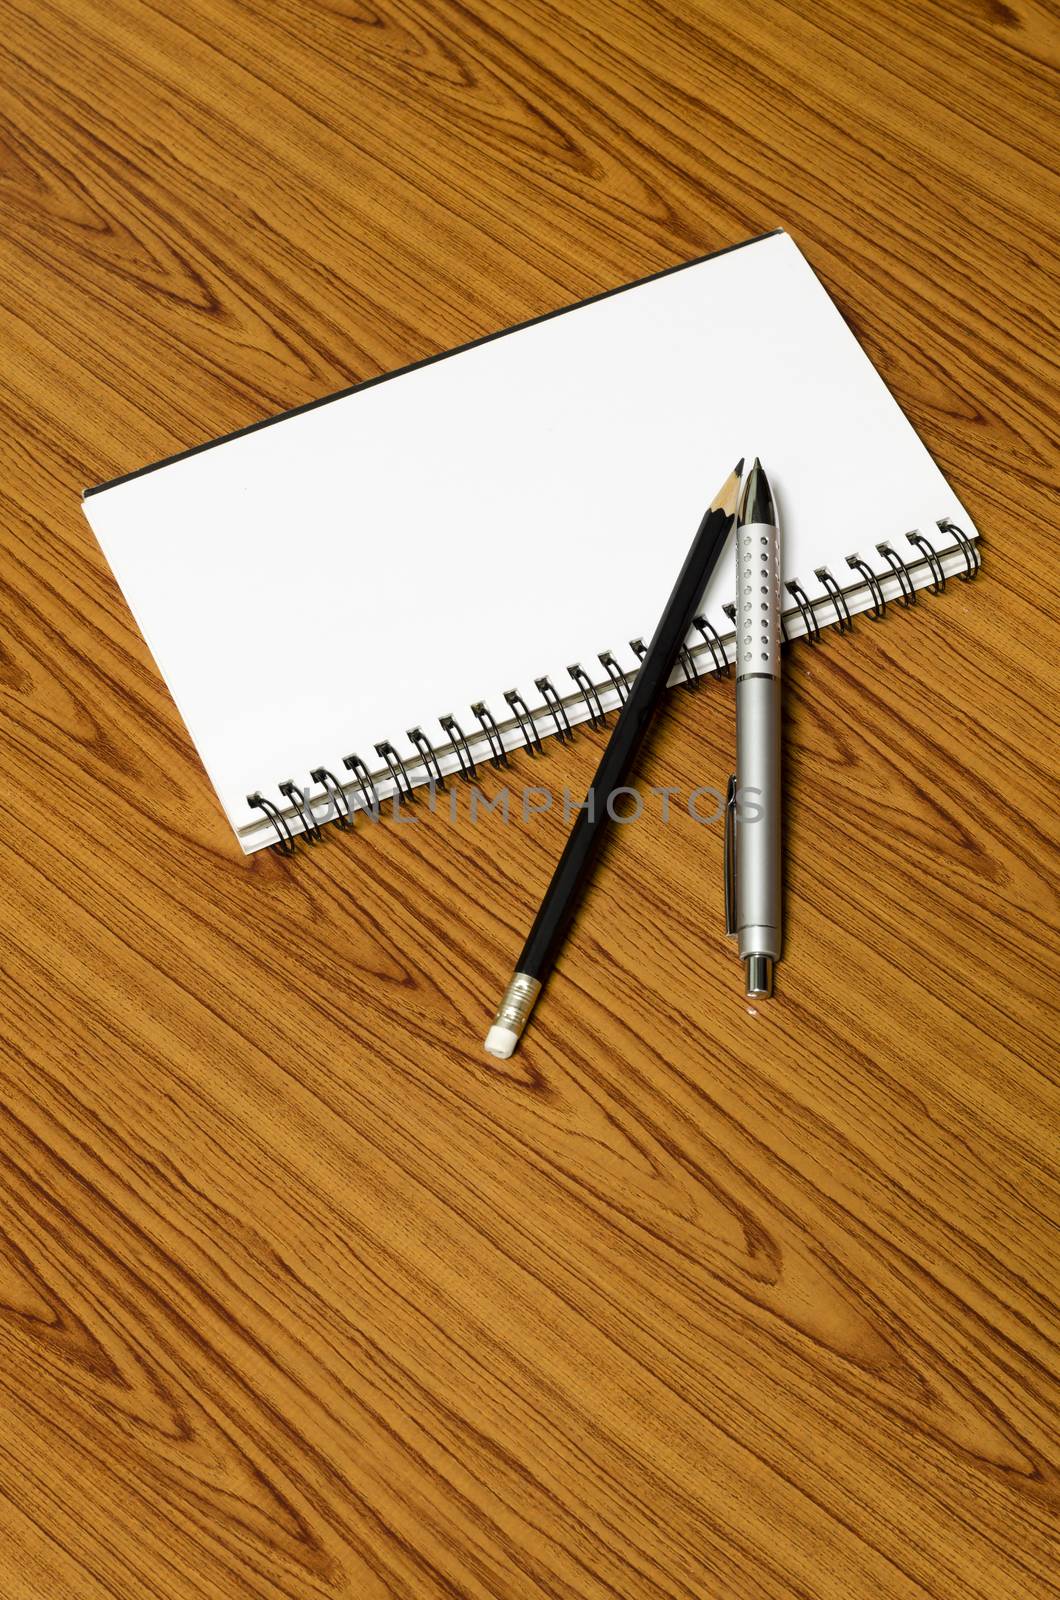 notebook pen and pencil on wood background